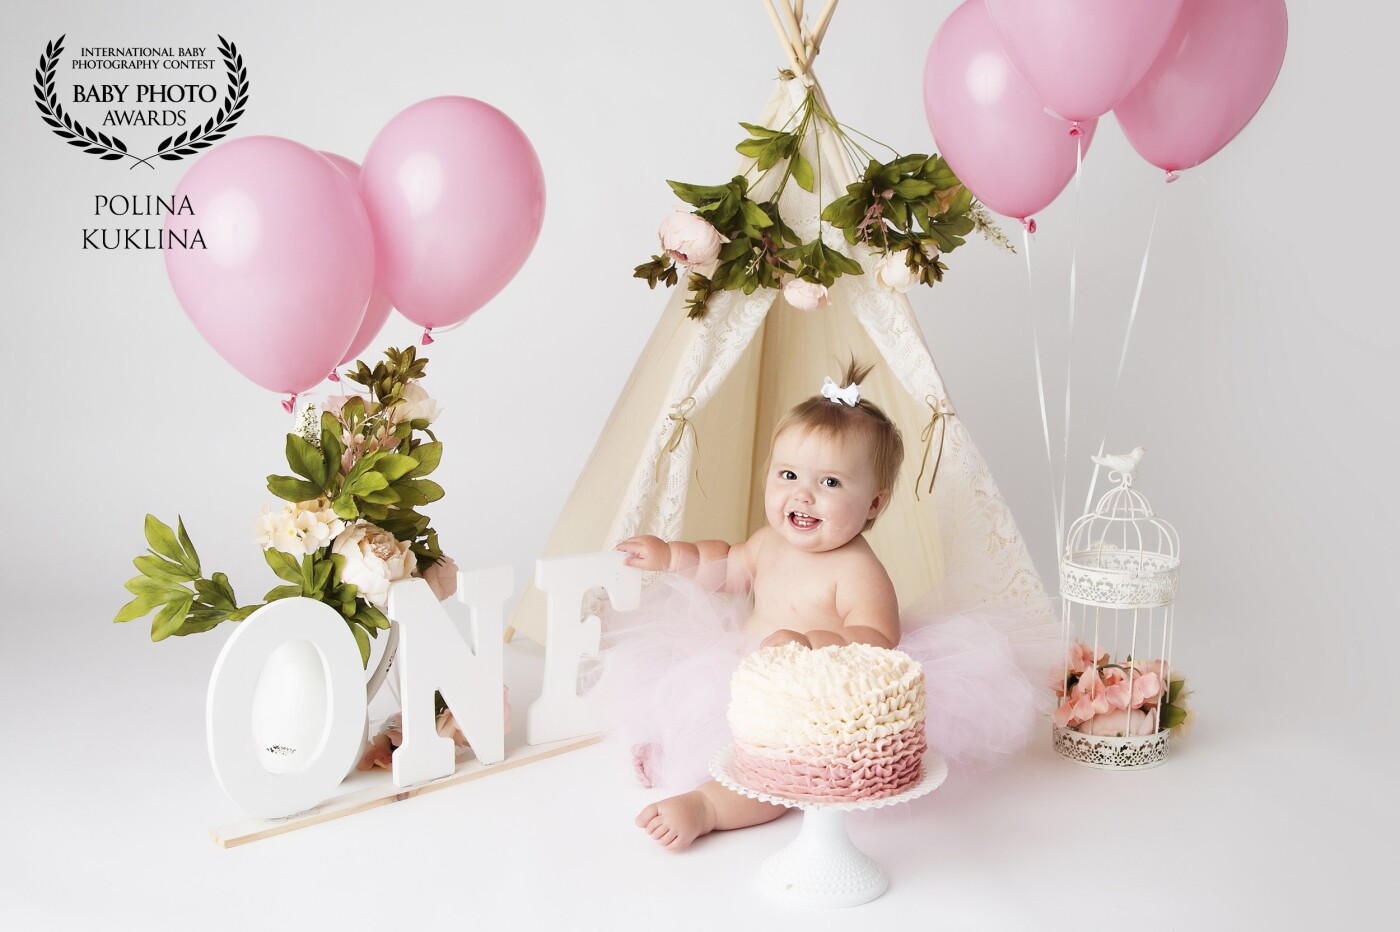 Baby Kali came to her first cake smash session about a month ago. She loved all her session decorations and the cake! She also had a fun bubble bath right after the smash!